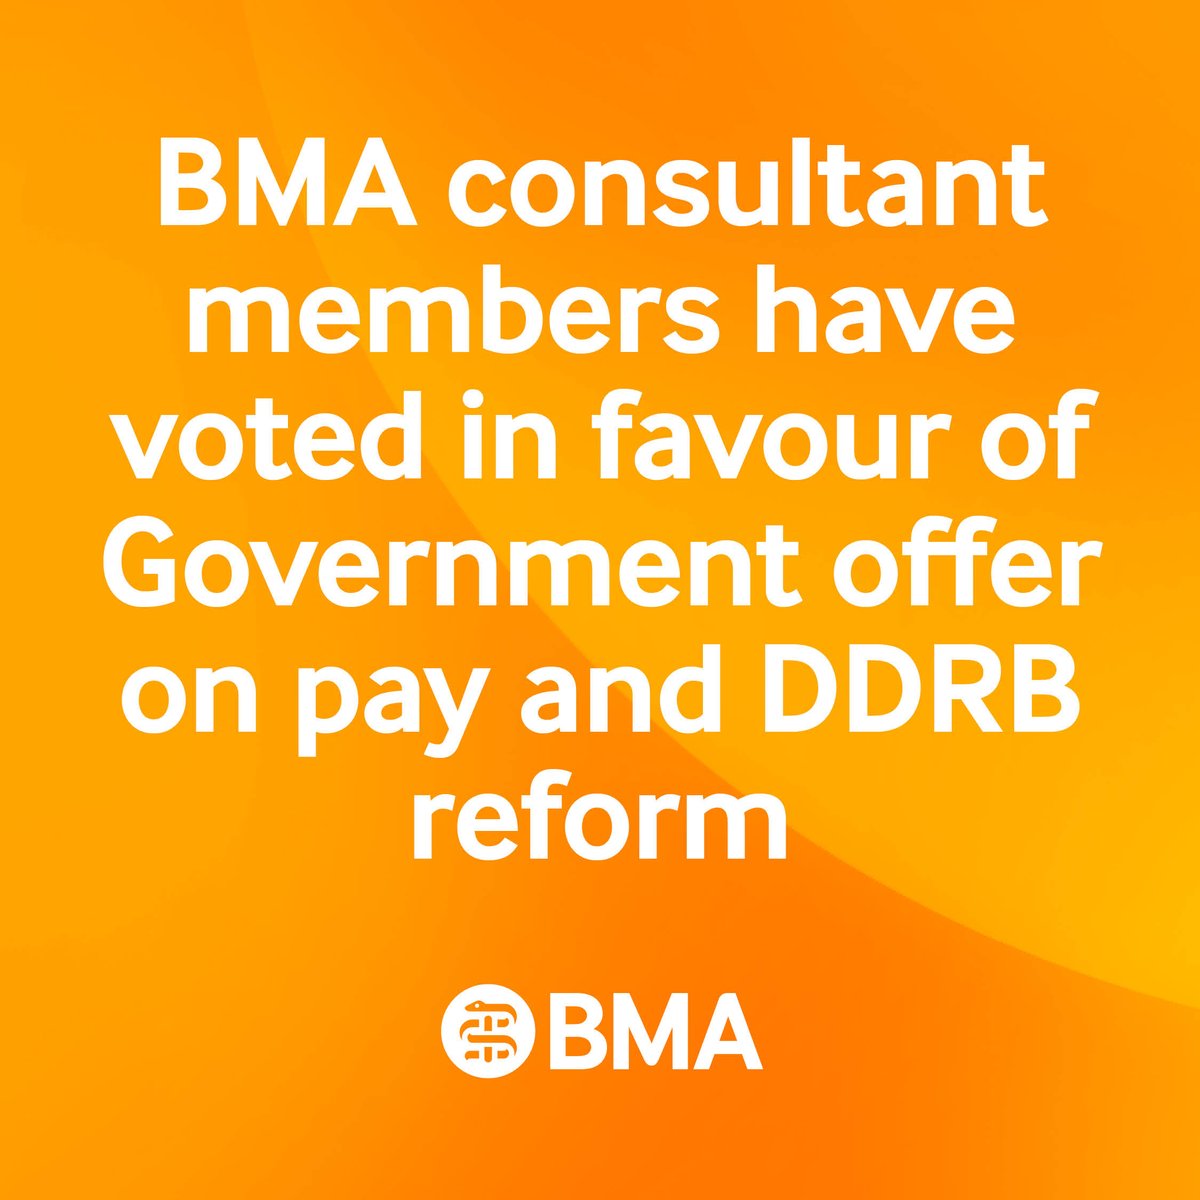 After months of unprecedented industrial action and campaigning, months of negotiations, and weeks of voting by BMA members, today we can announce that the latest Government offer on pay and DDRB reform for consultants in England has been accepted. bma.org.uk/consultantspay